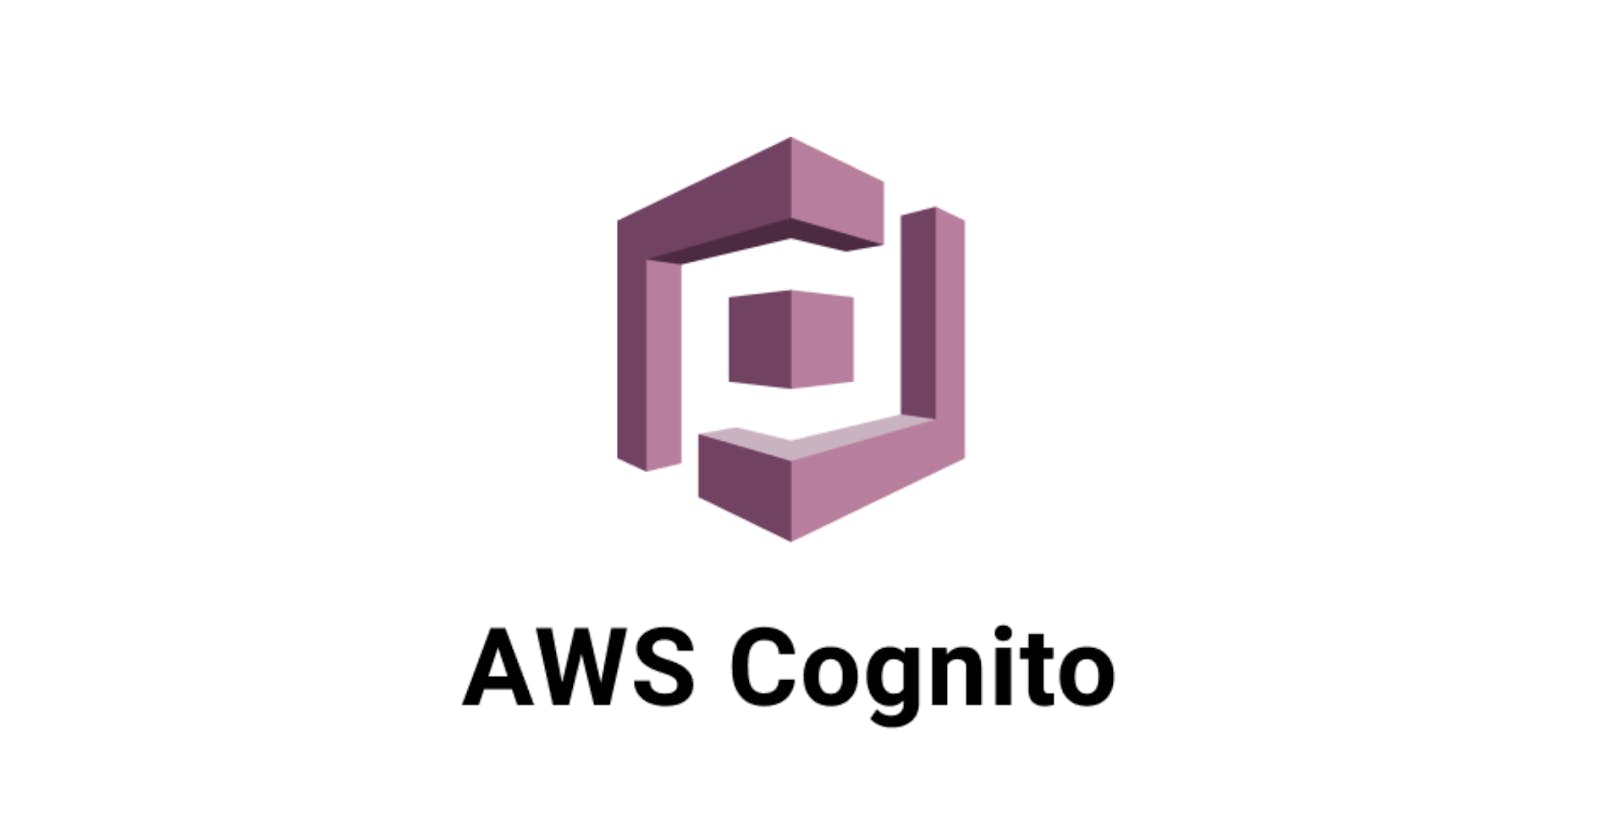 How to Use Amazon Cognito in AWS?